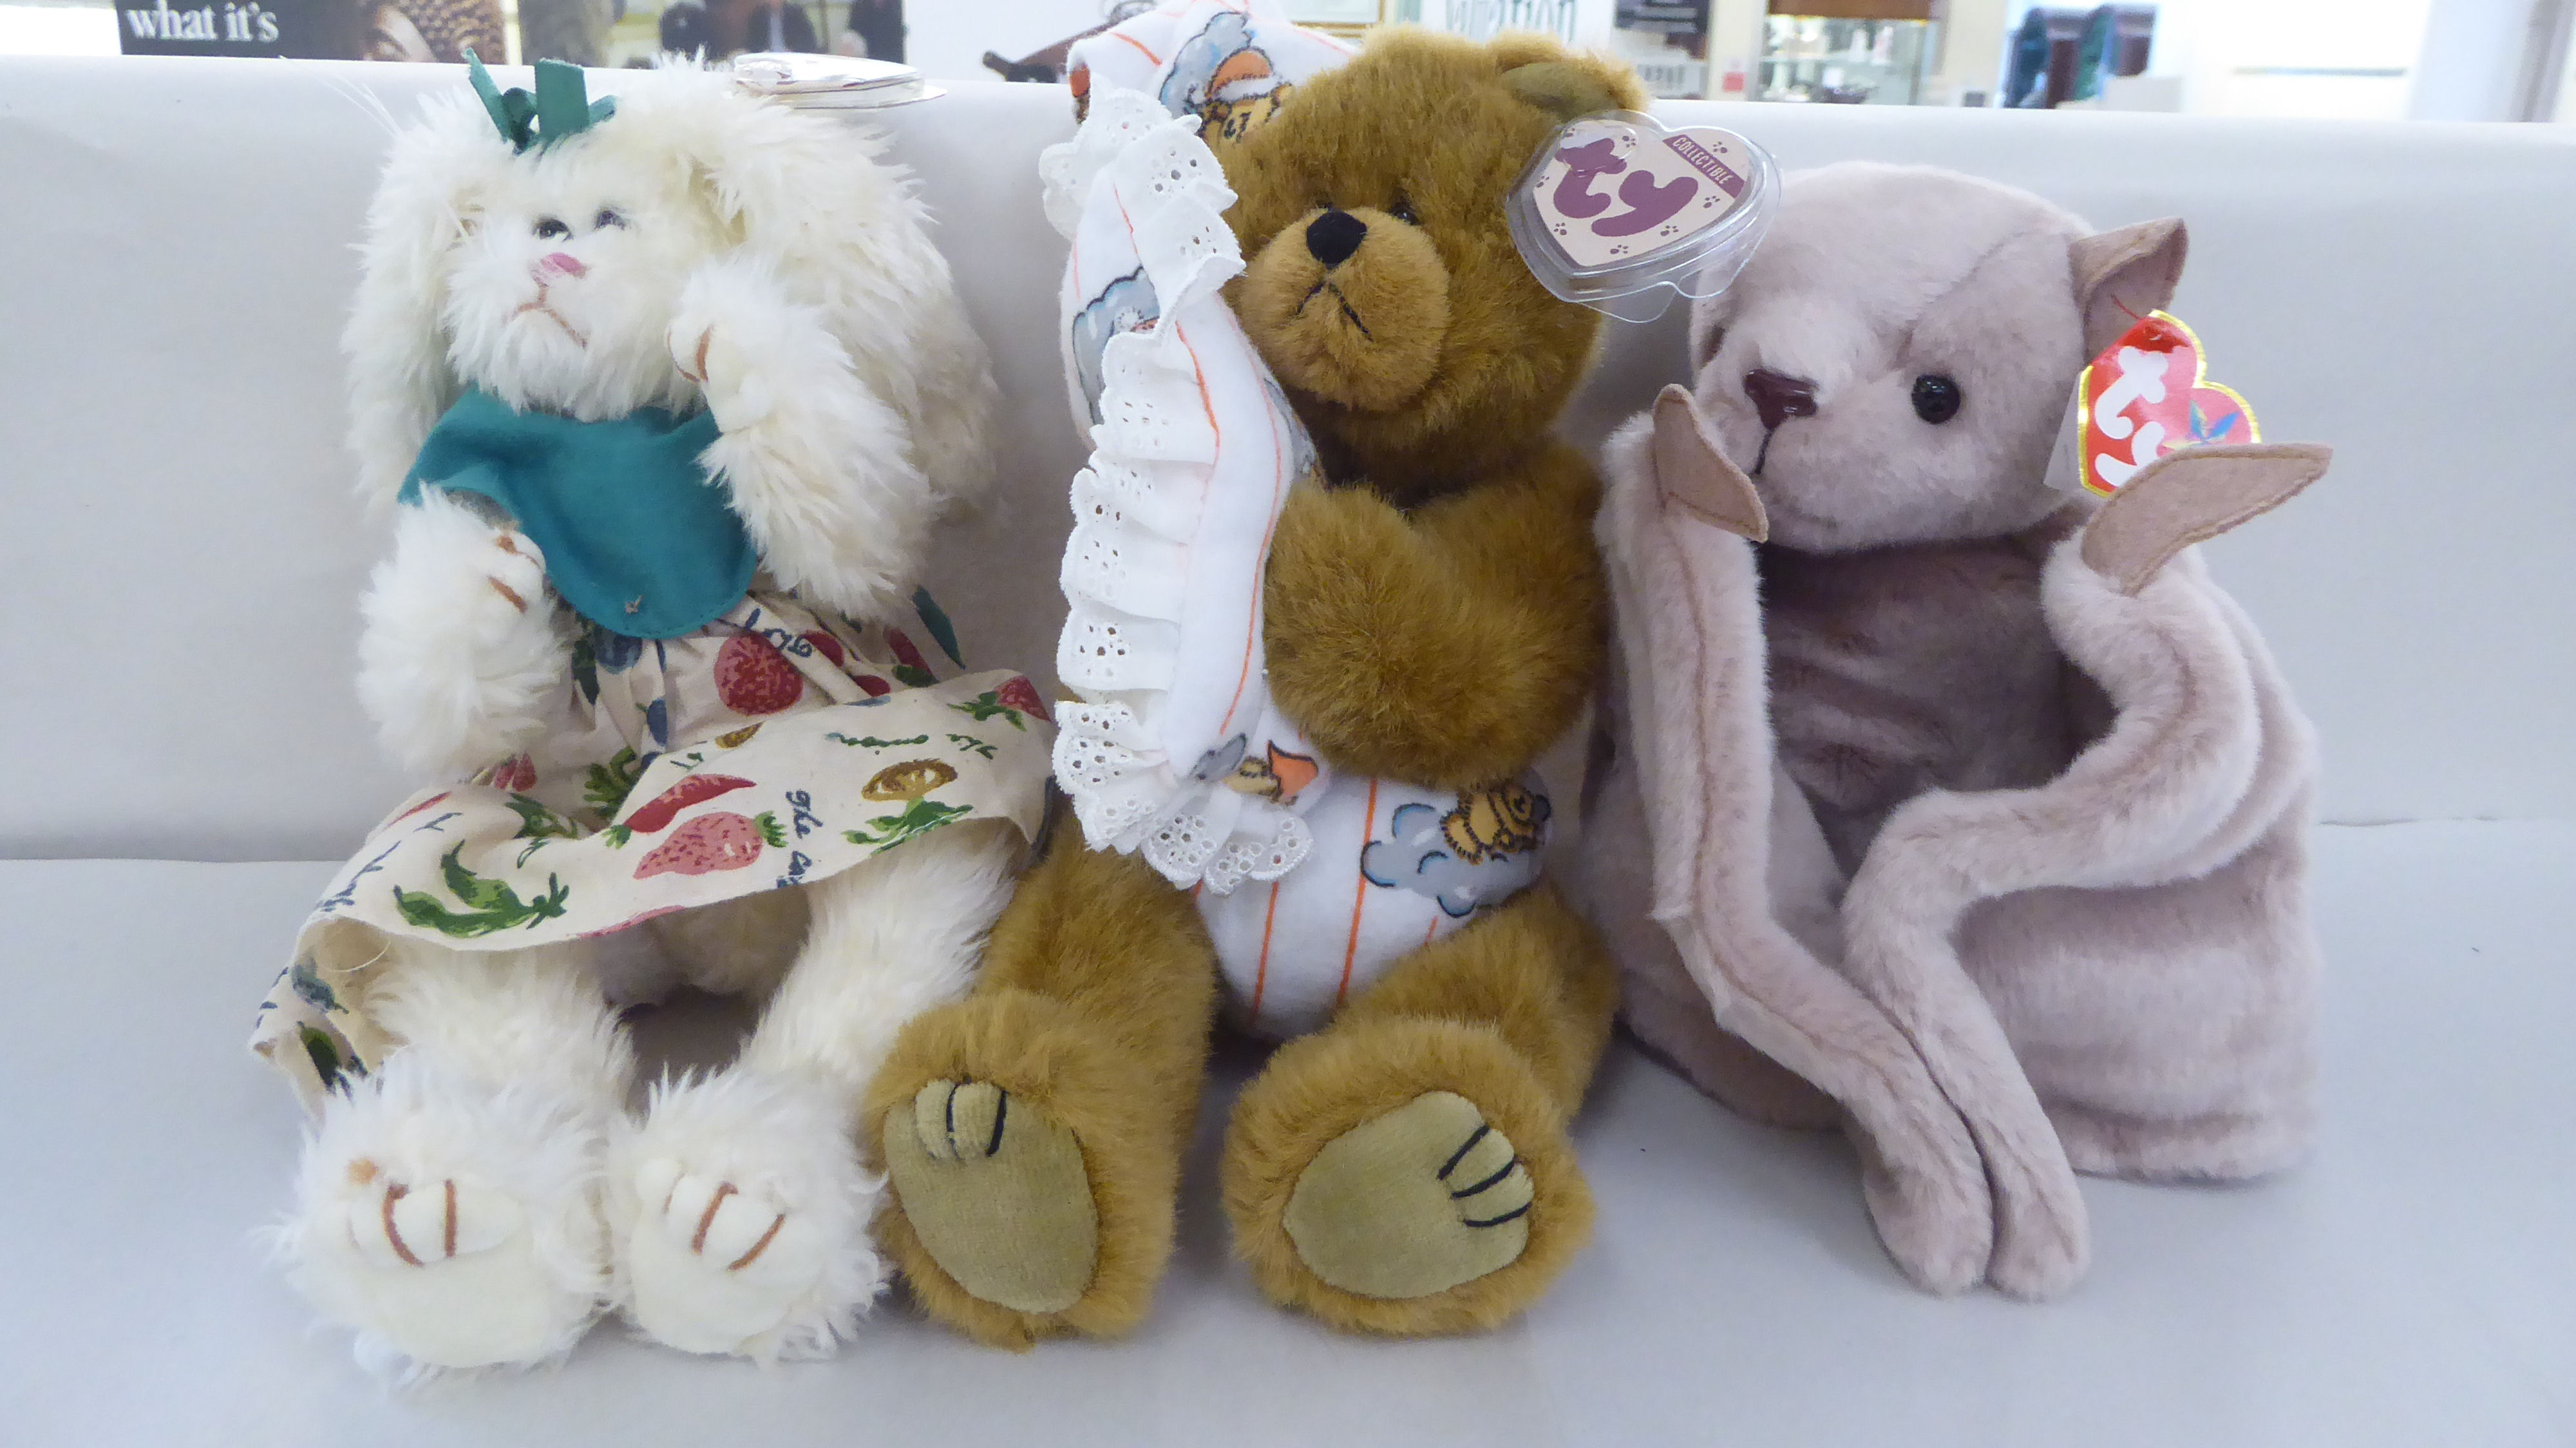 Beanie Buddy Teddy bears and animals: to include a bear wearing a suit - Image 3 of 6